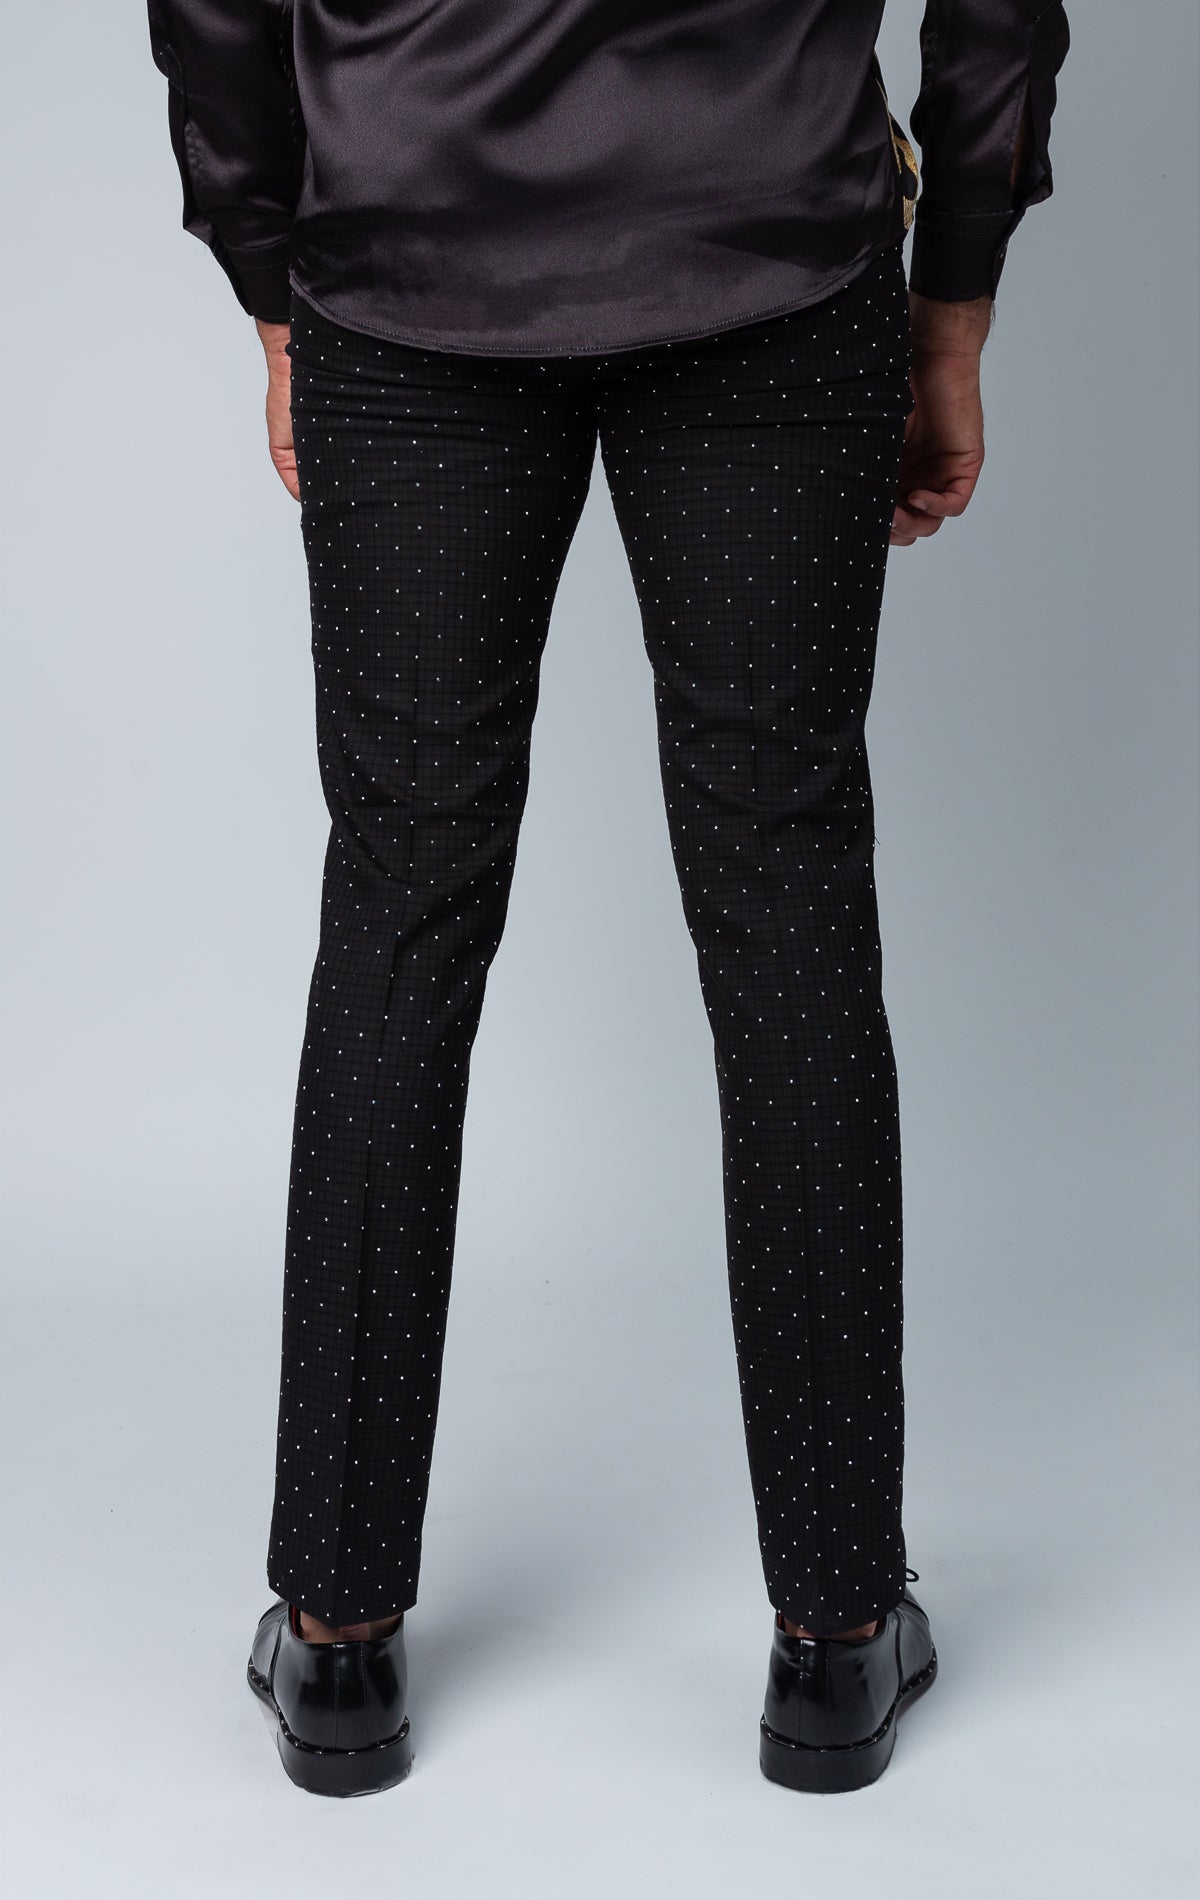 Black dress pants with crystals all over